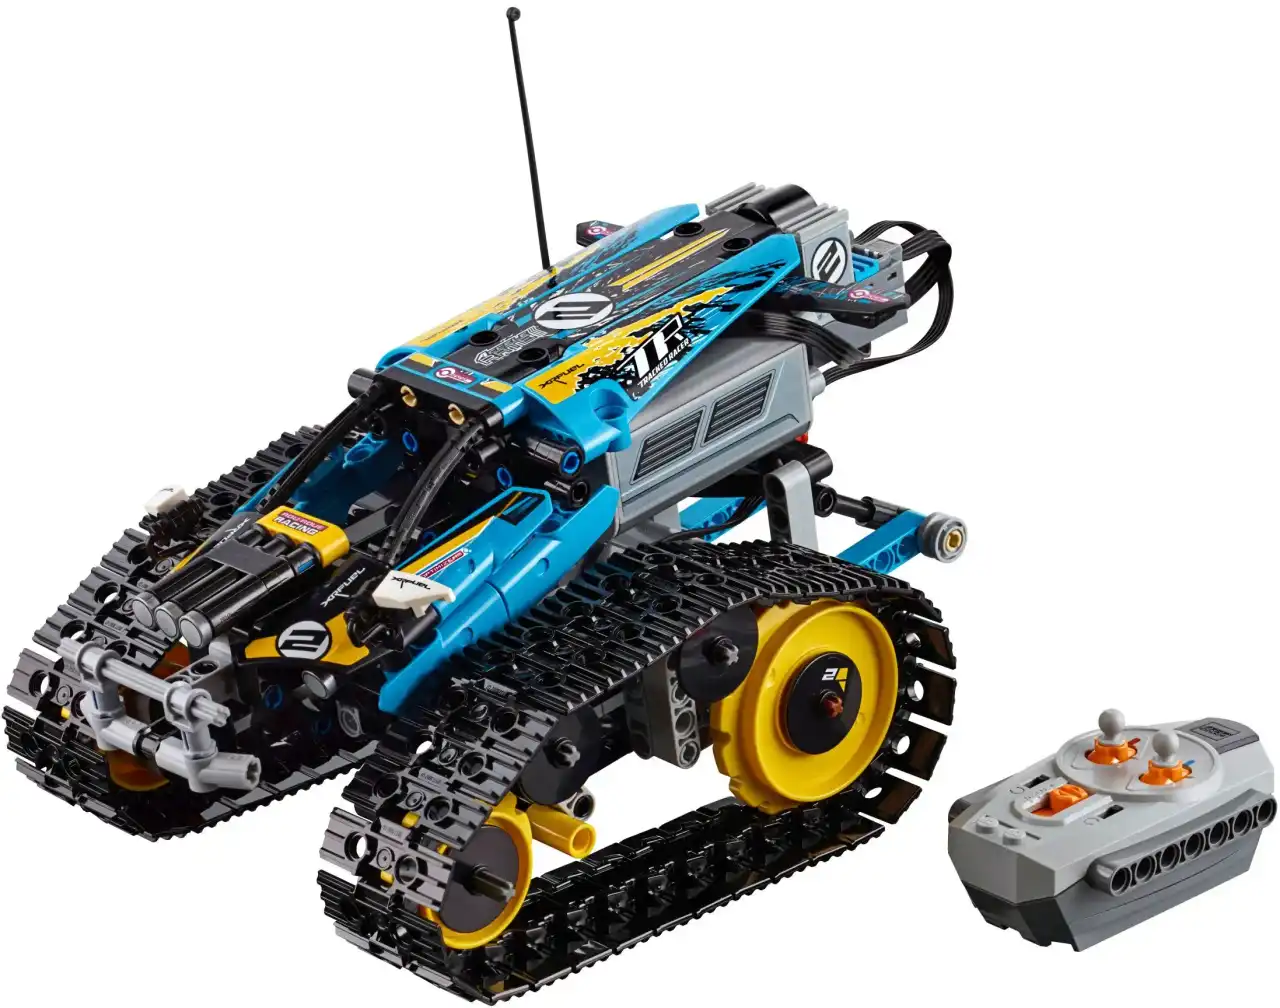 42095 - Remote-Controlled Stunt Racer